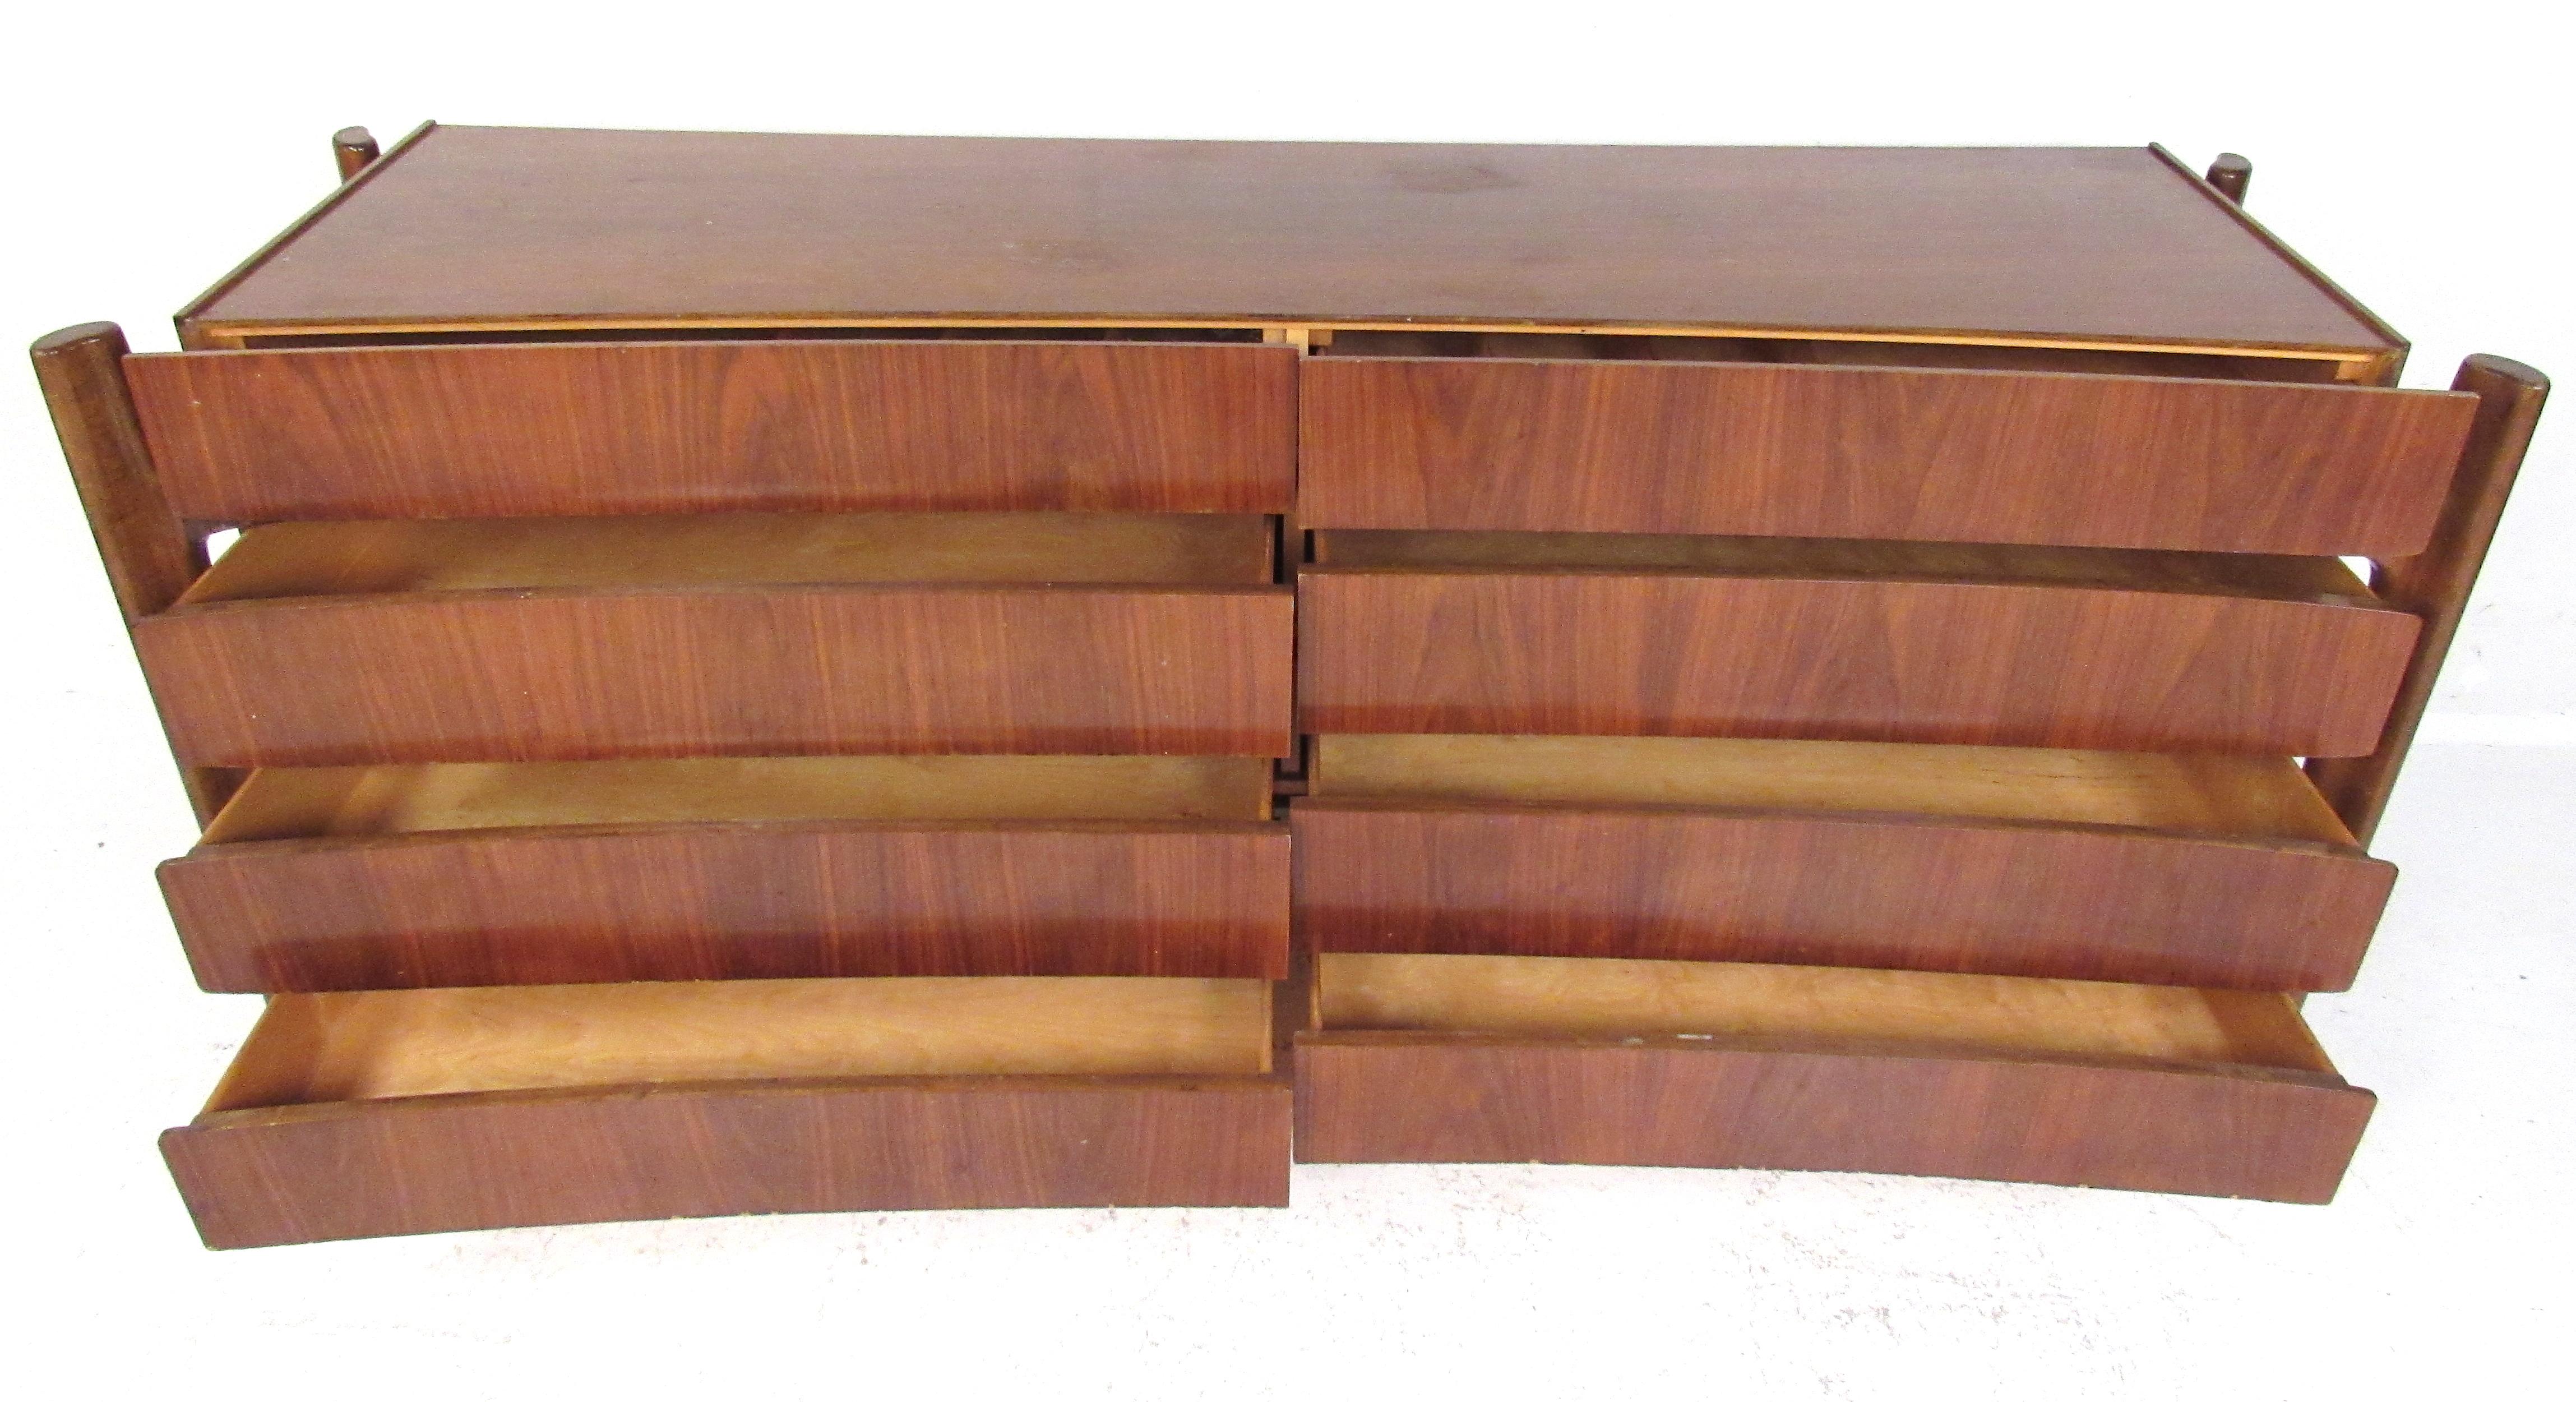 Rare low dresser and chest with top cabinet by William Hinn. Featuring curved fronts with unique exposed carved walnut legs and a bookmatched front. Beautiful and sculptural, this eye-catching design makes the perfect centerpiece for any modern